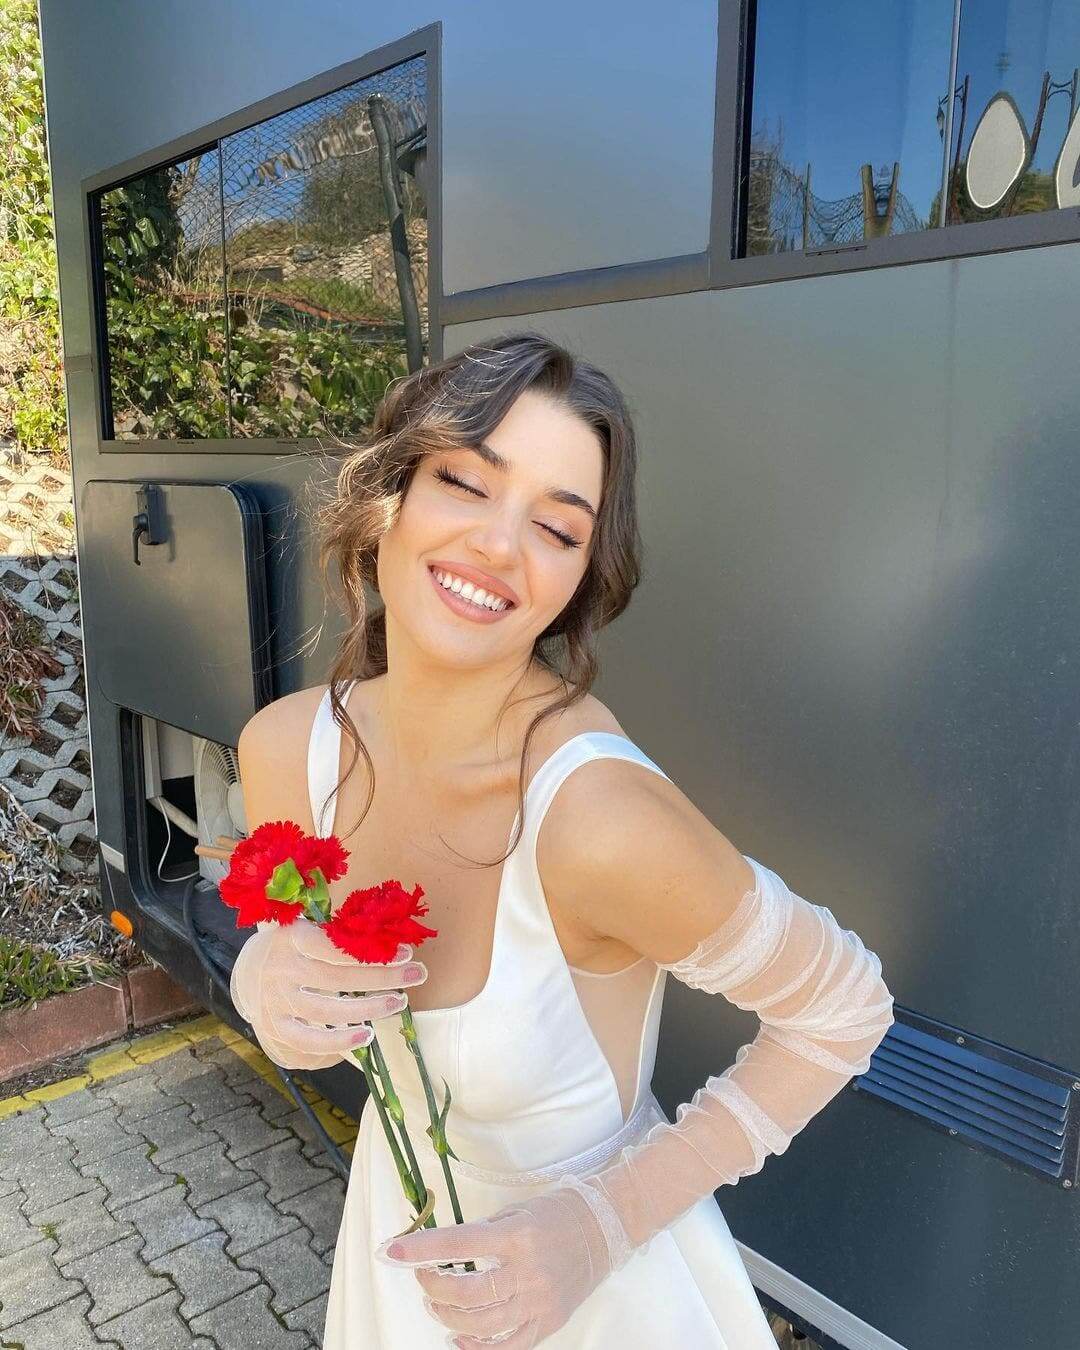 Hande Ercel Is Named The Most Beautiful Woman Of Turkish Actors